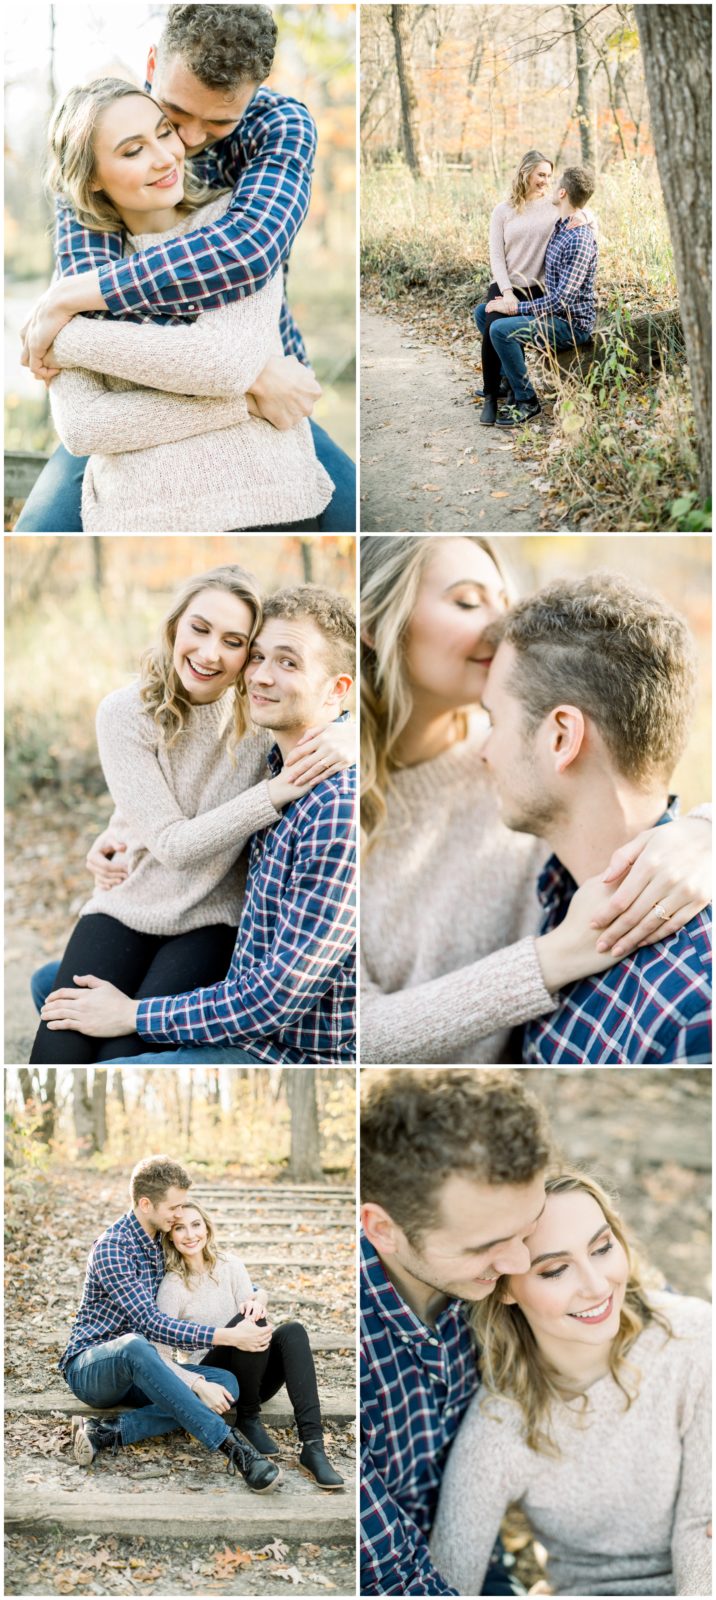 Composition of photos of couple smiling and showing affection towards each other.